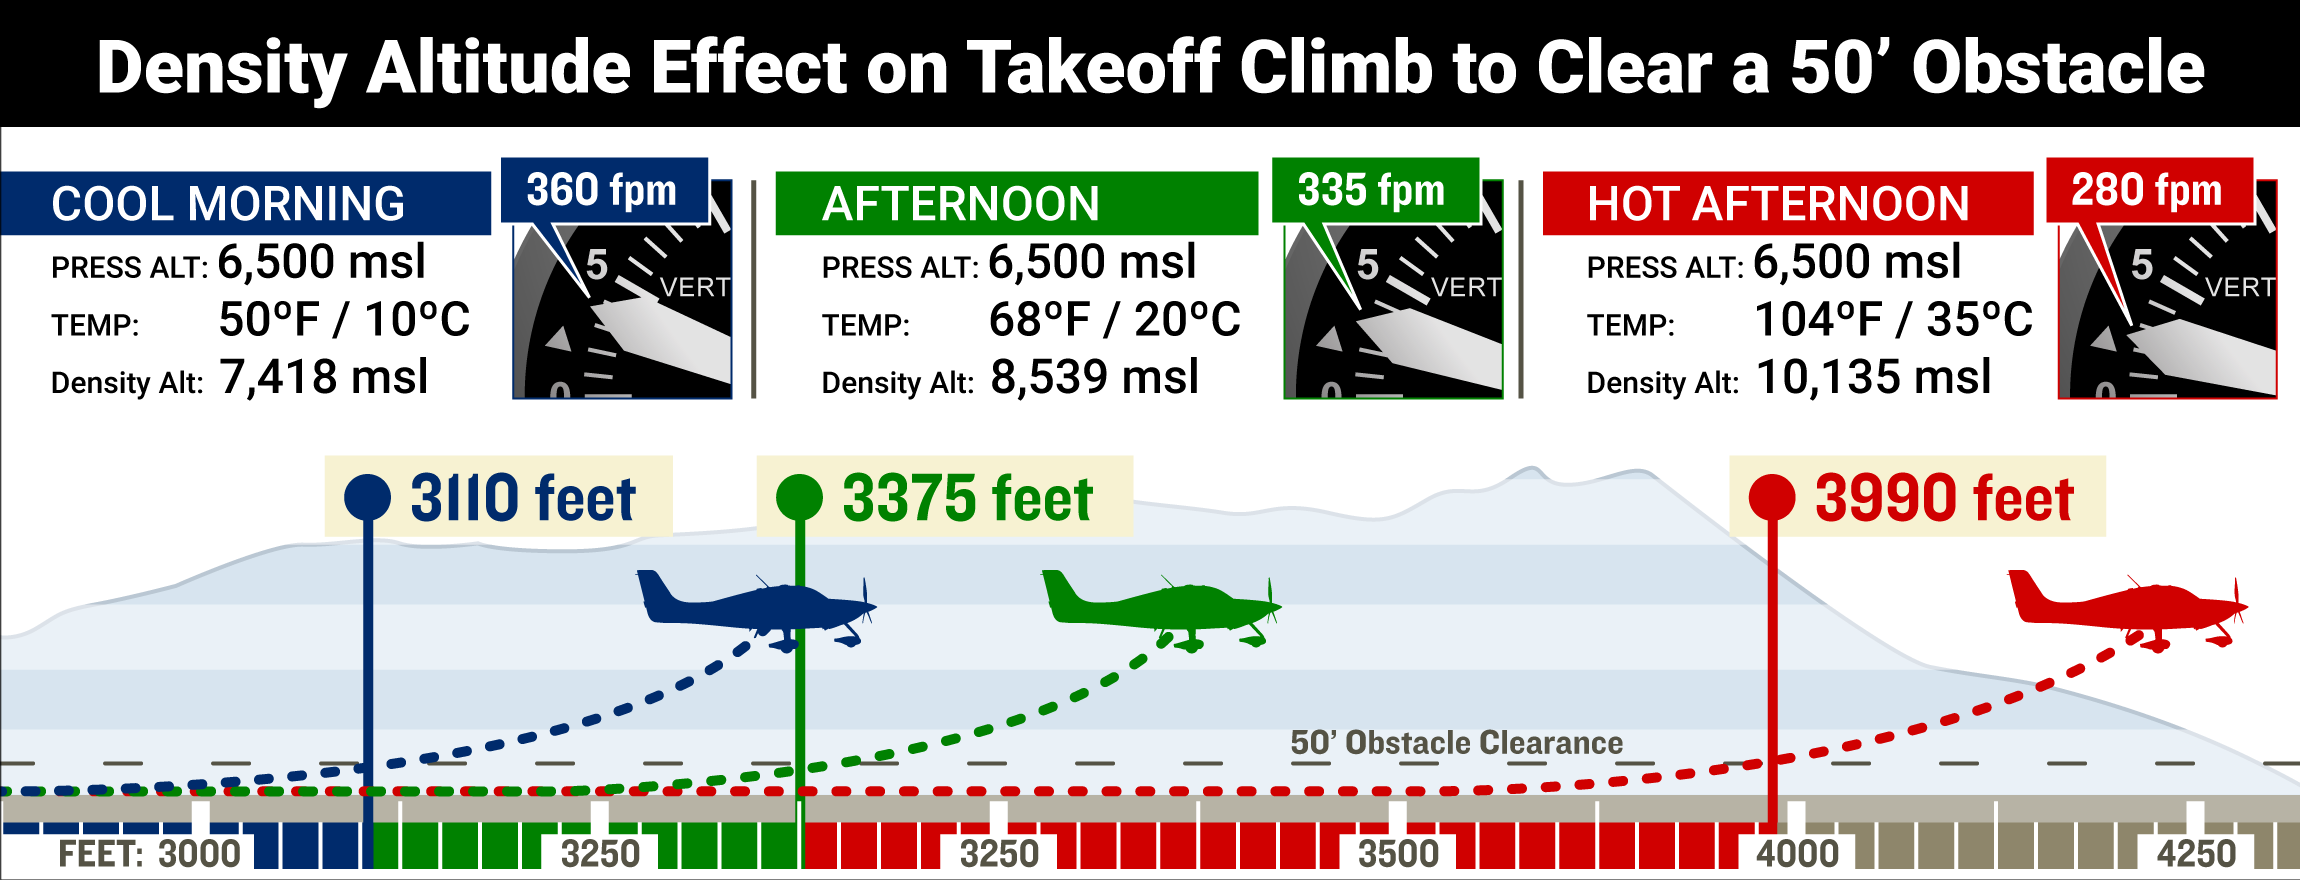 Density Altitude Effect on Takeoff Climb to Clear a 50 foot Obstacle